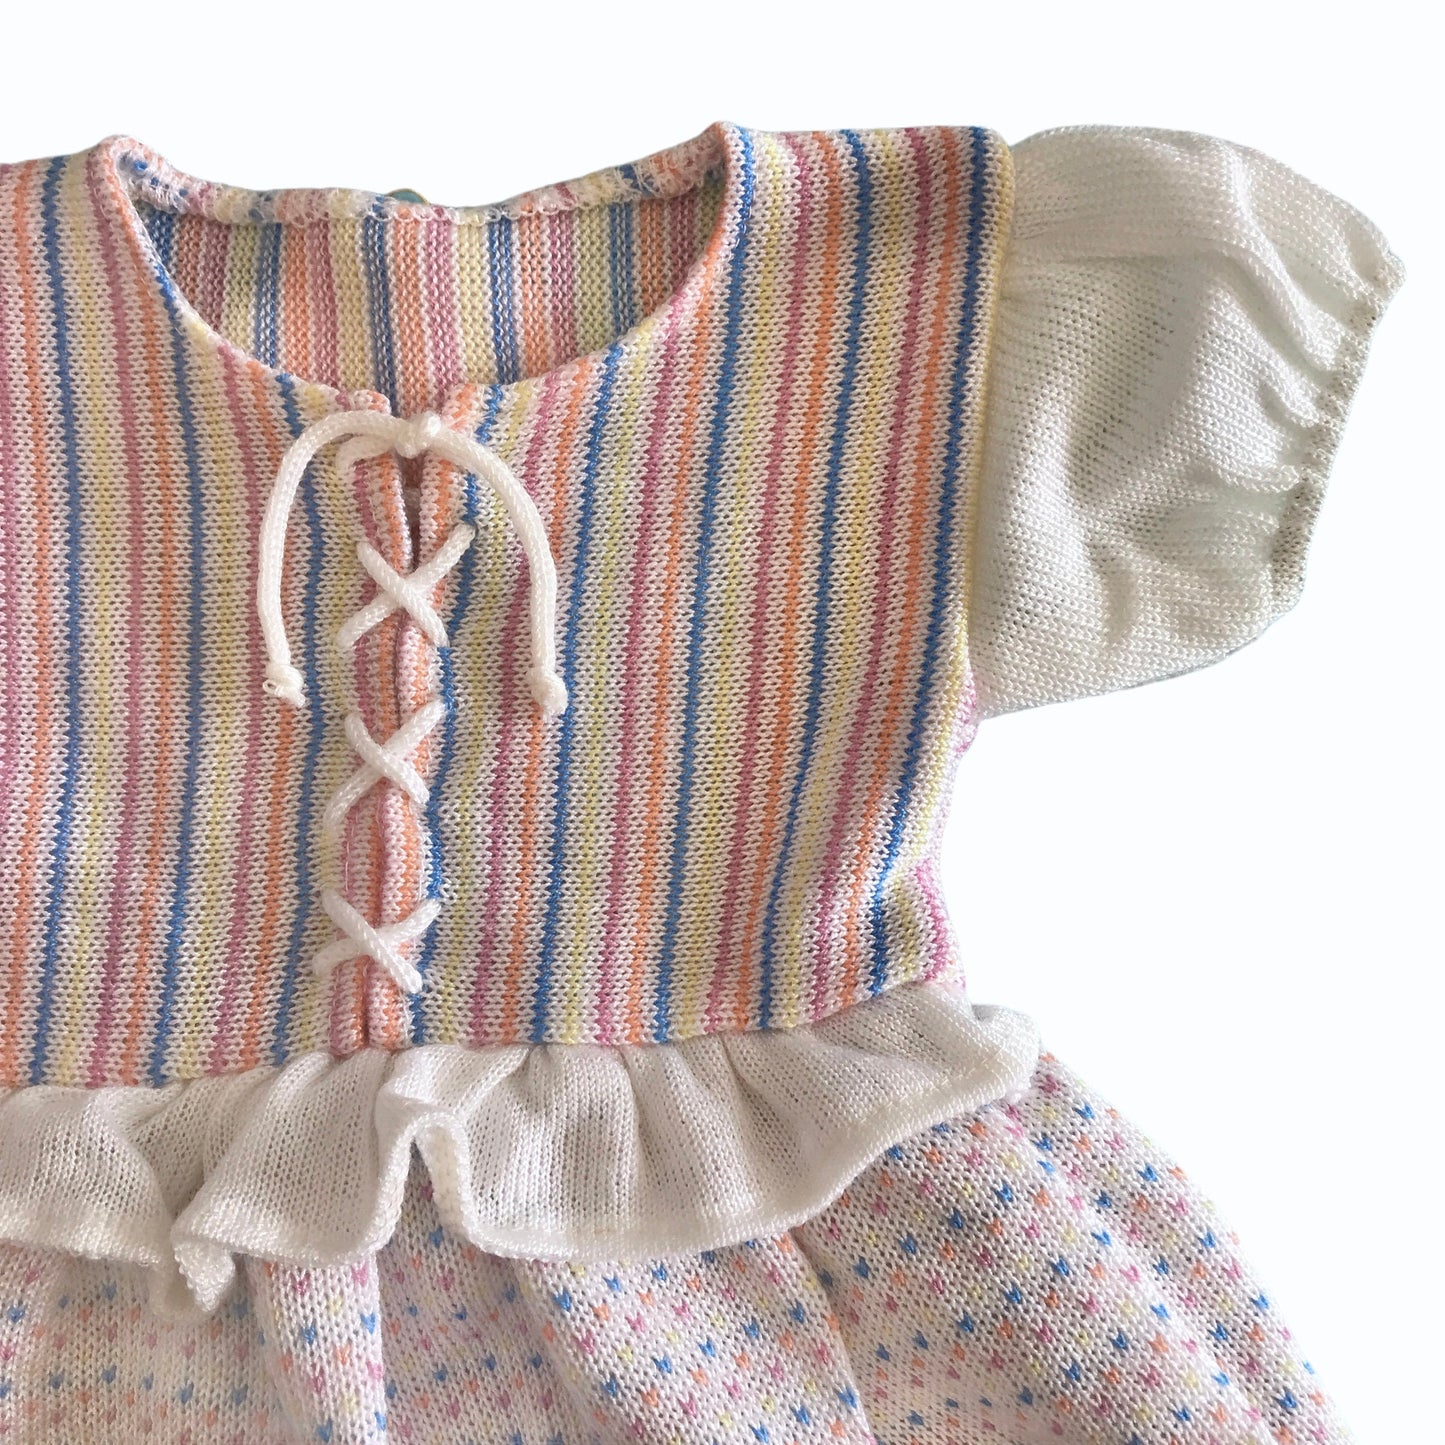 Vintage 1970s Pastel Knitted Dress French Made 3-6 Months